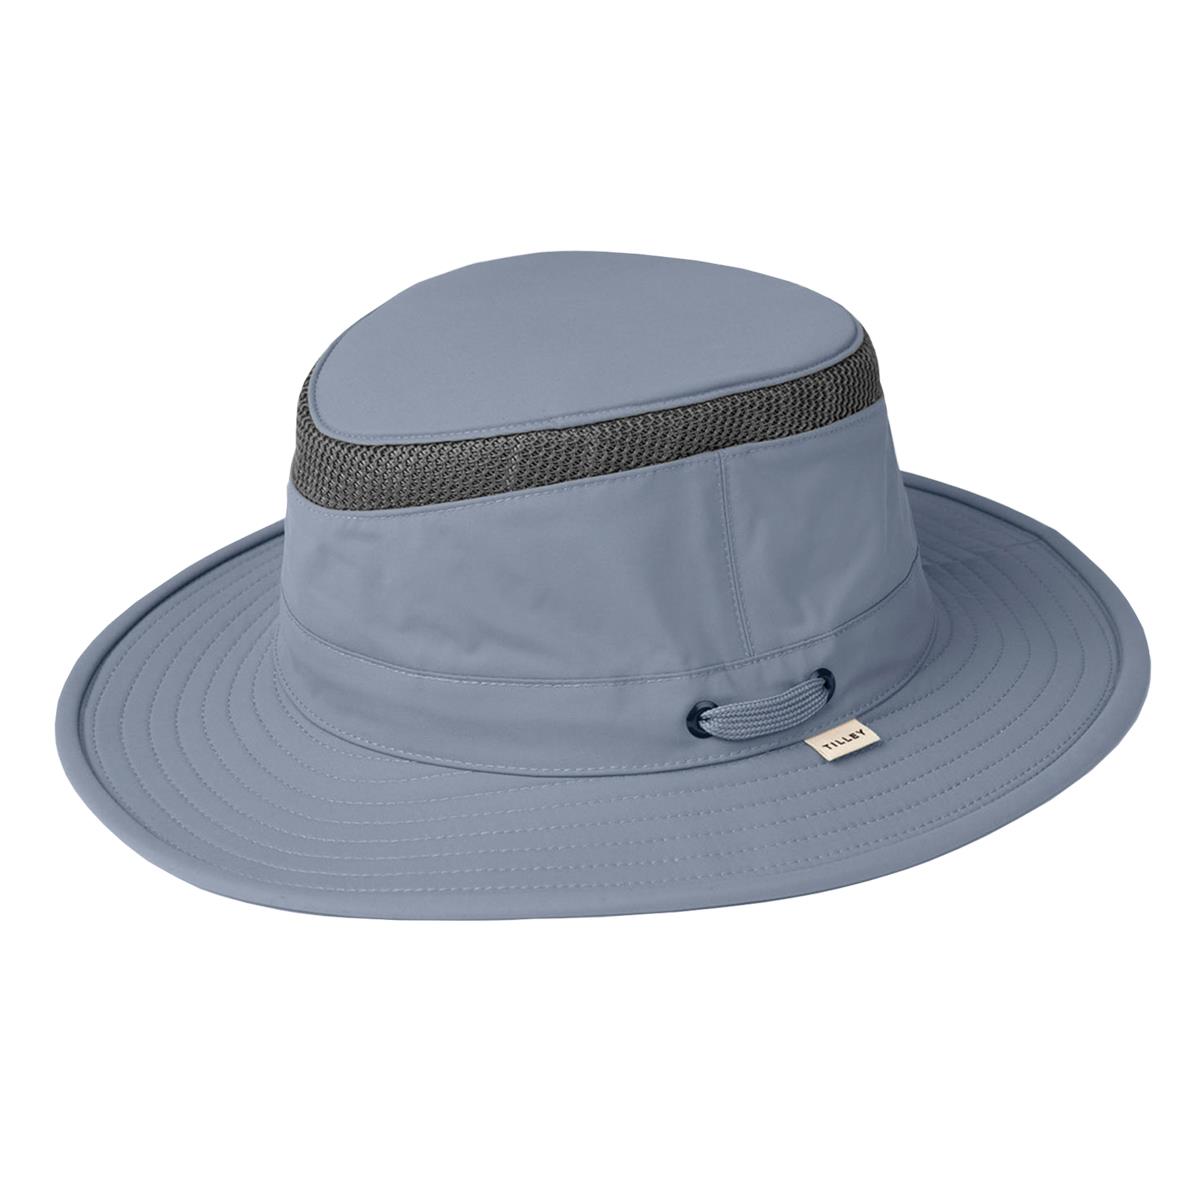 Can the LTM5 Tilley hat be washed?